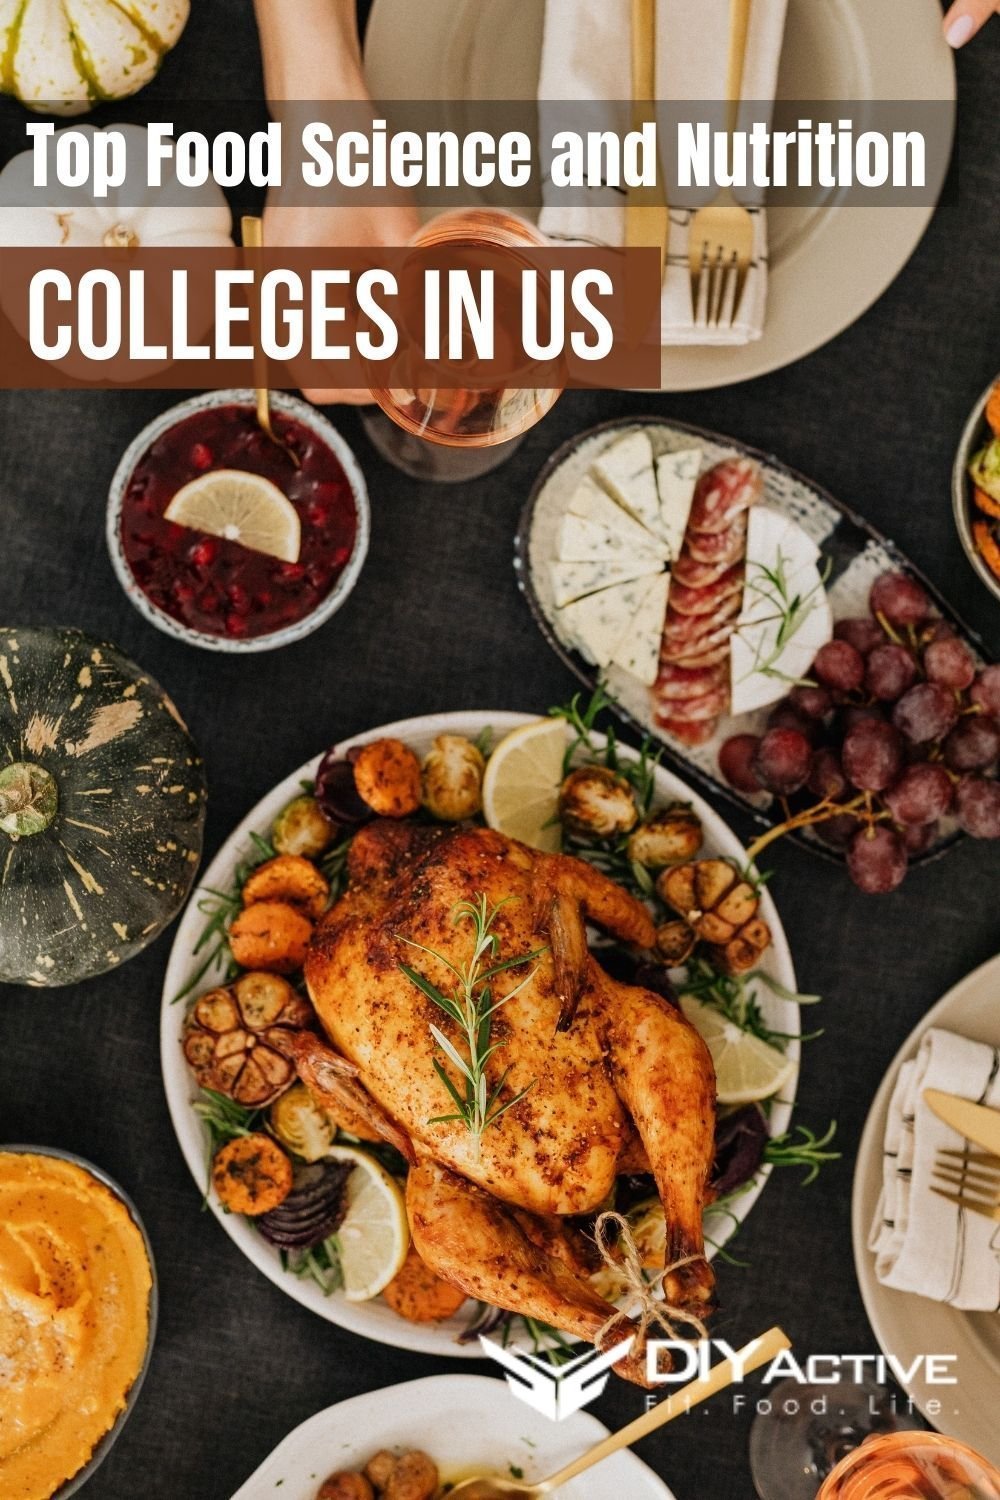 Top Food Science and Nutrition Colleges in US 2